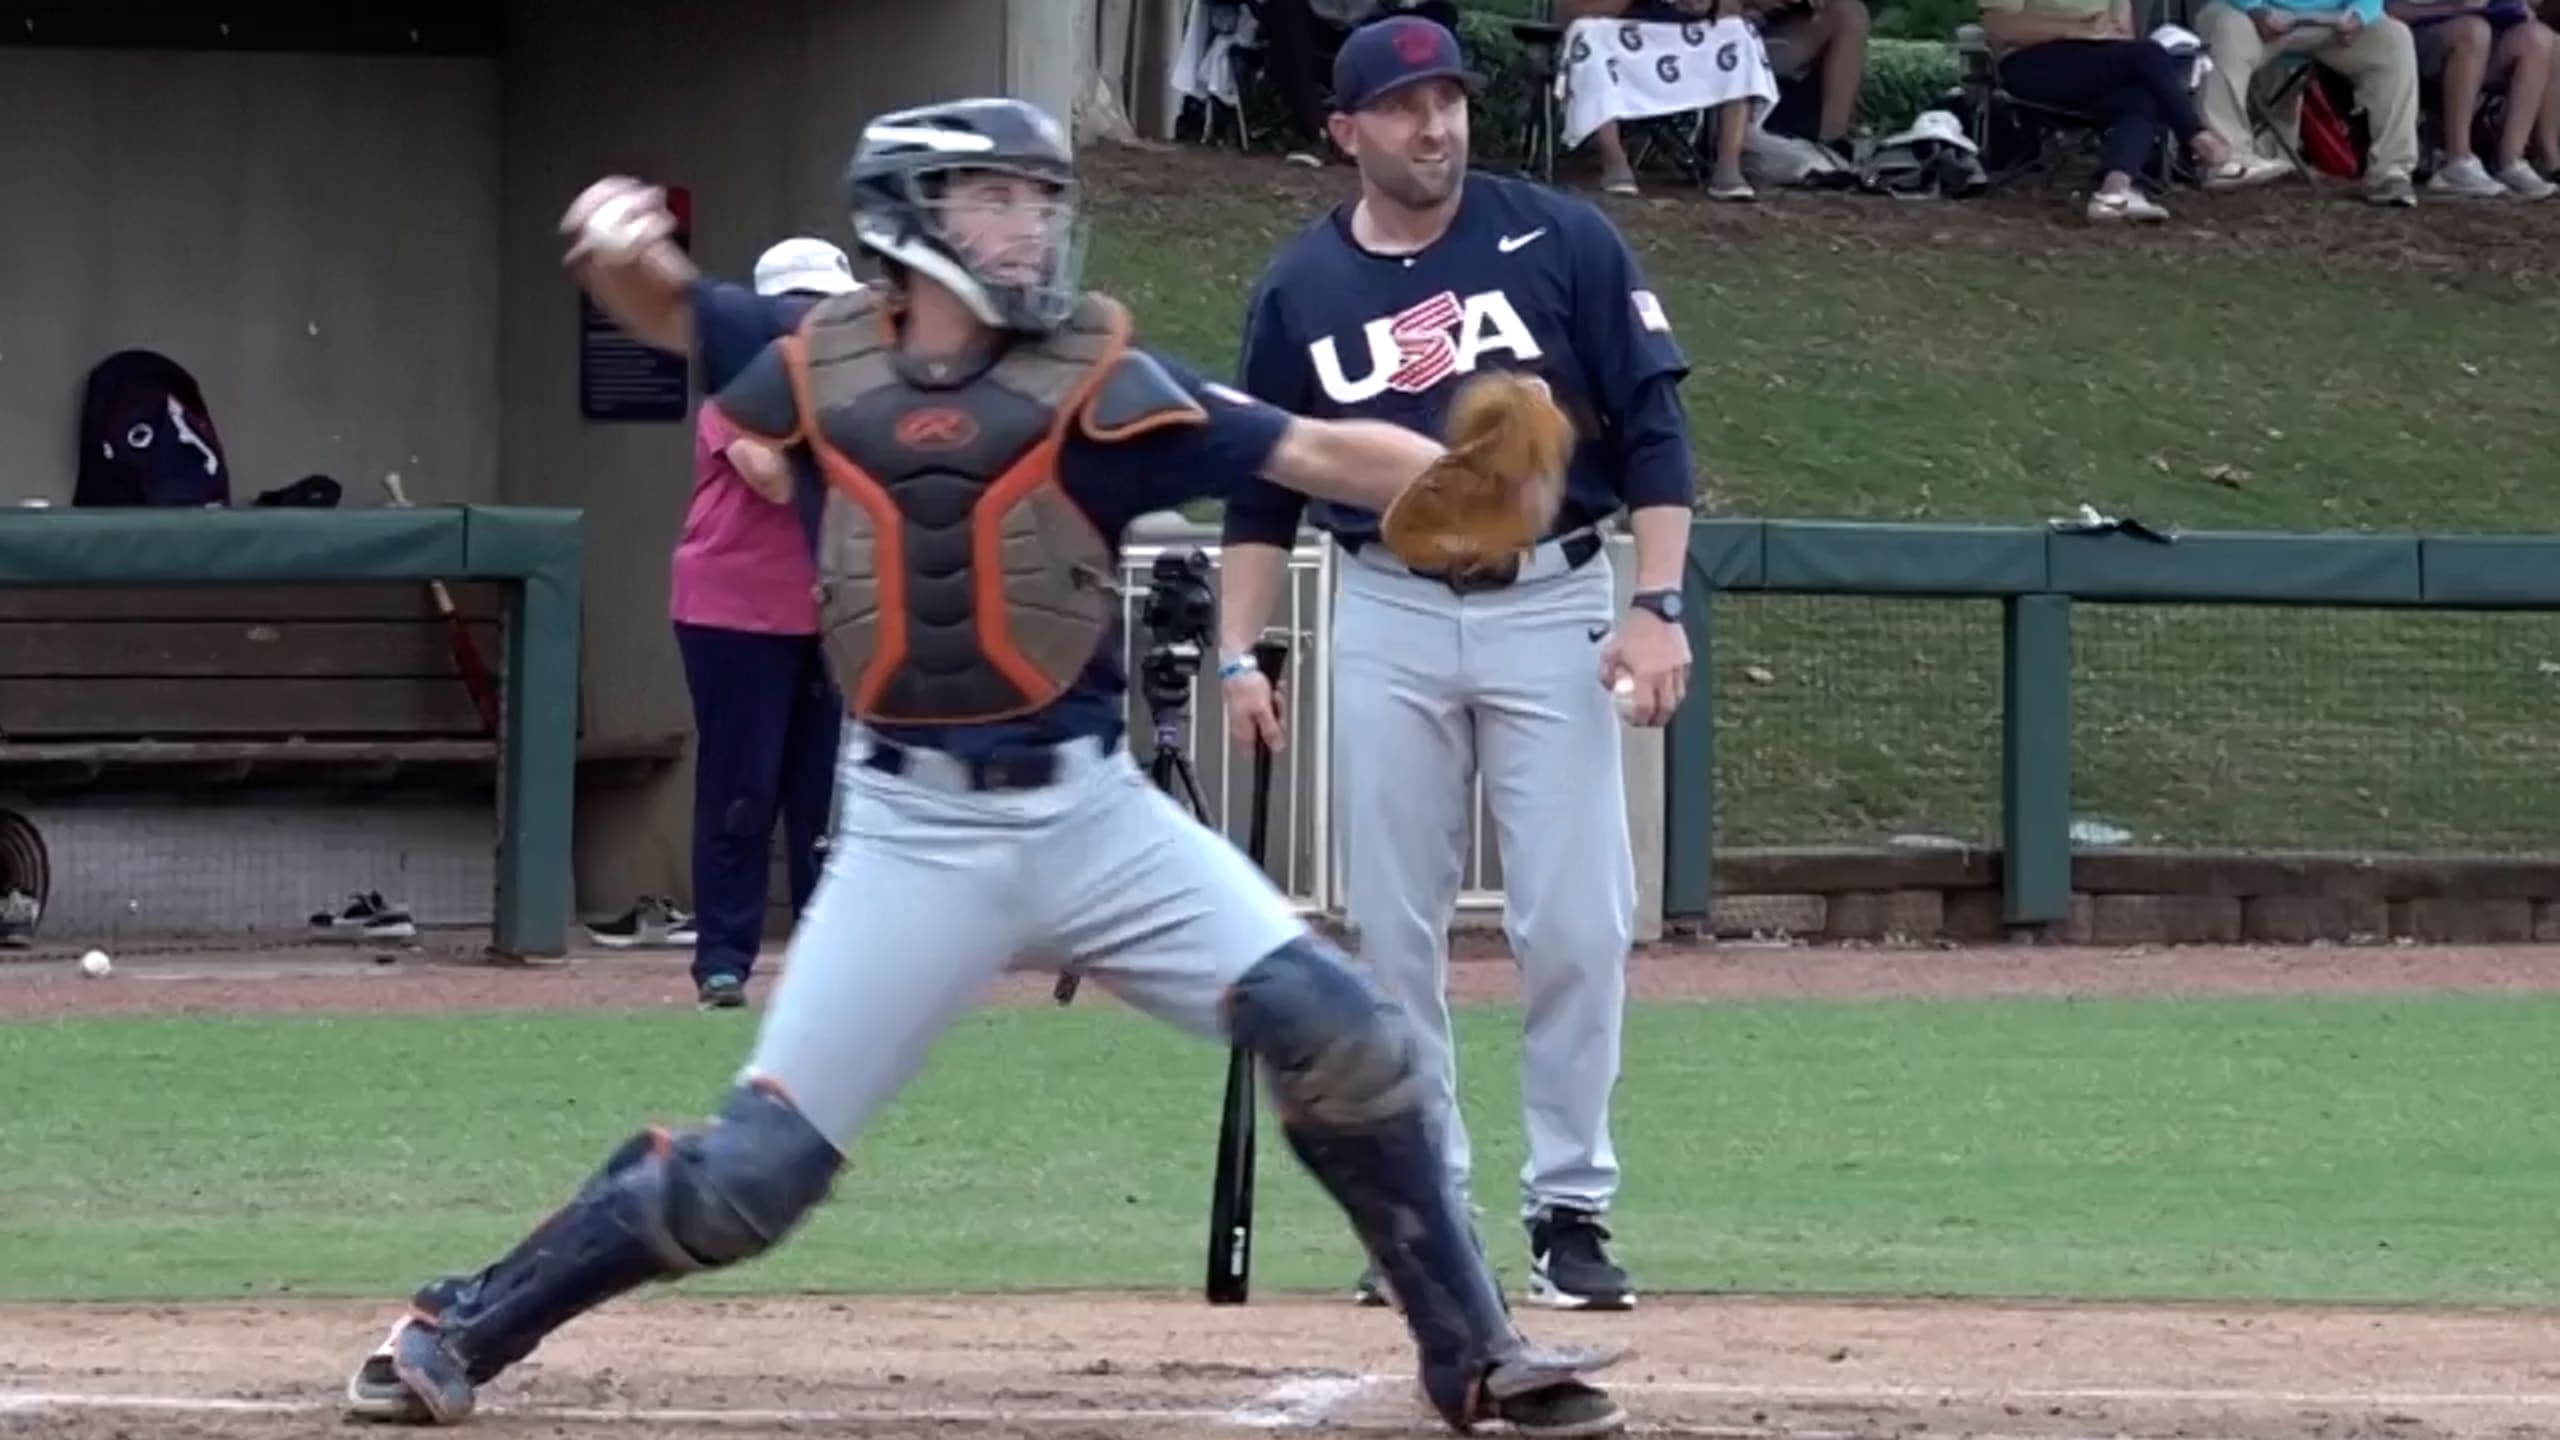 Red Sox draft Virginia catcher Kyle Teel with 14th overall pick - CBS Boston